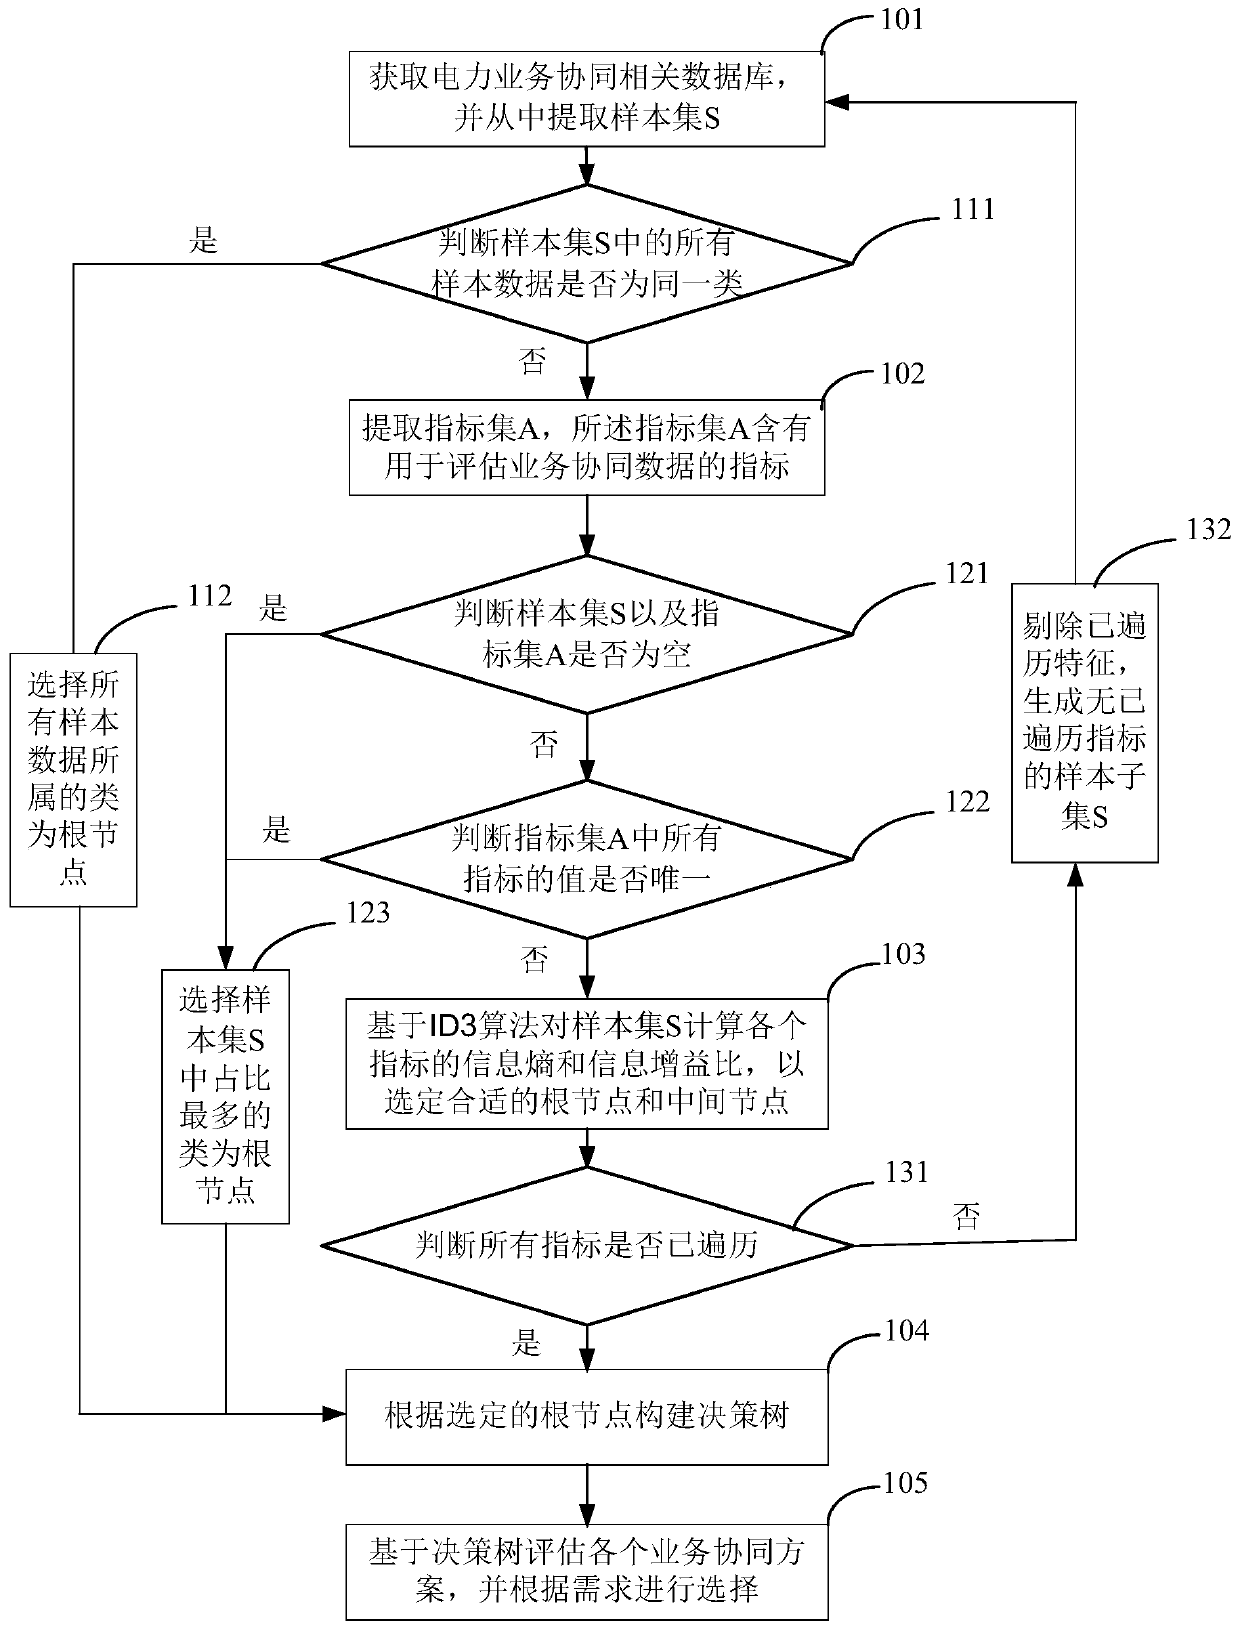 Power business collaborative classification method and system based on ID3 decision tree algorithm